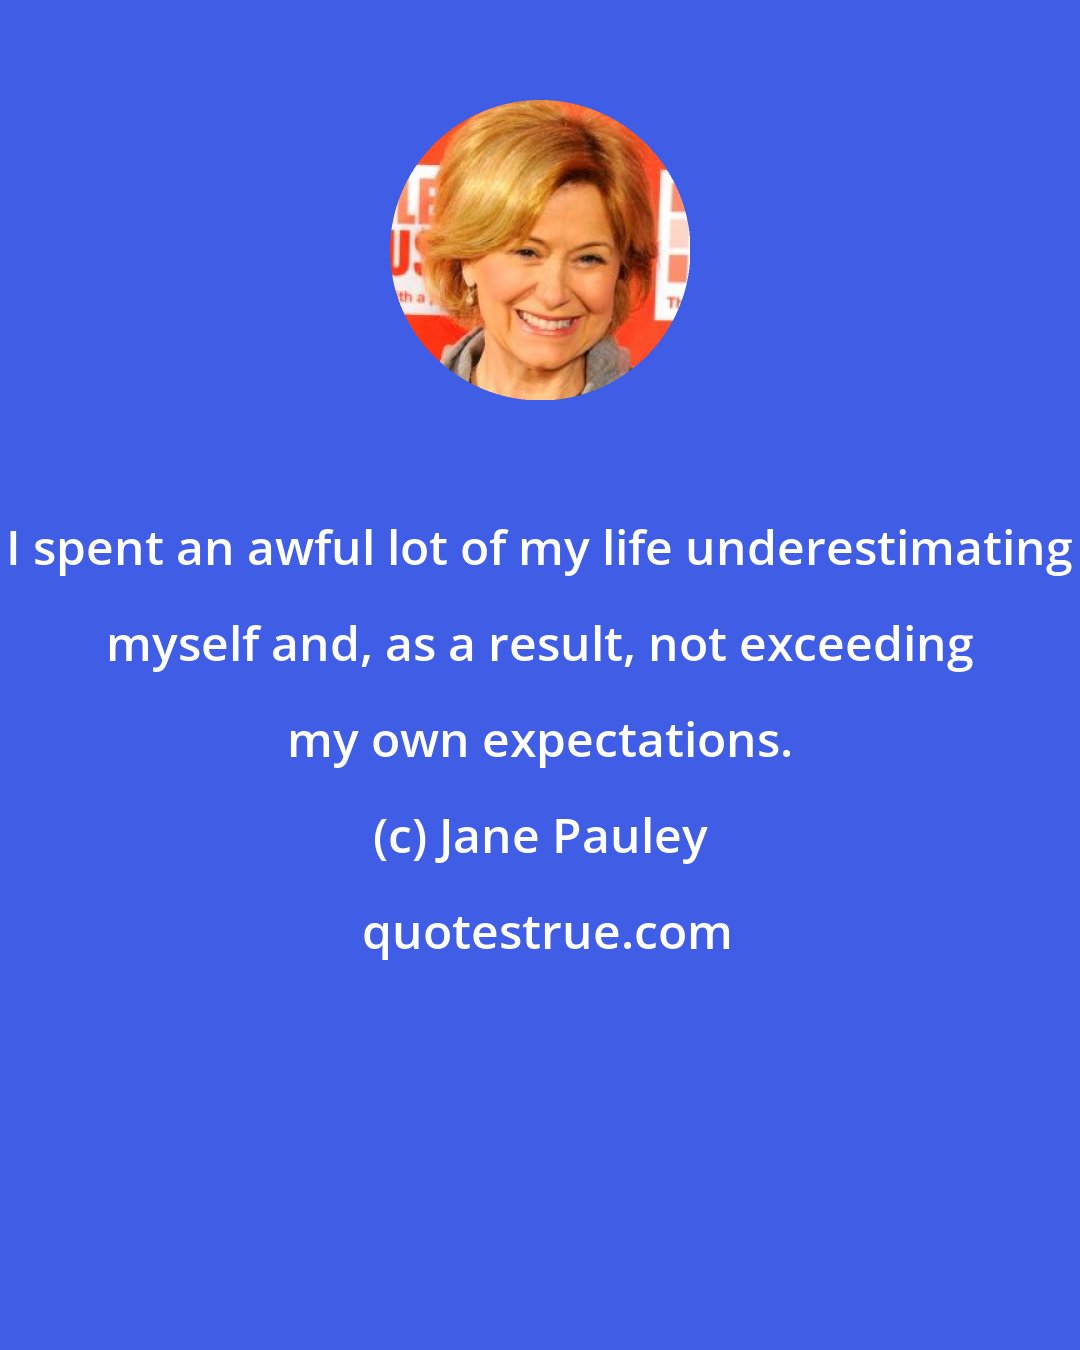 Jane Pauley: I spent an awful lot of my life underestimating myself and, as a result, not exceeding my own expectations.